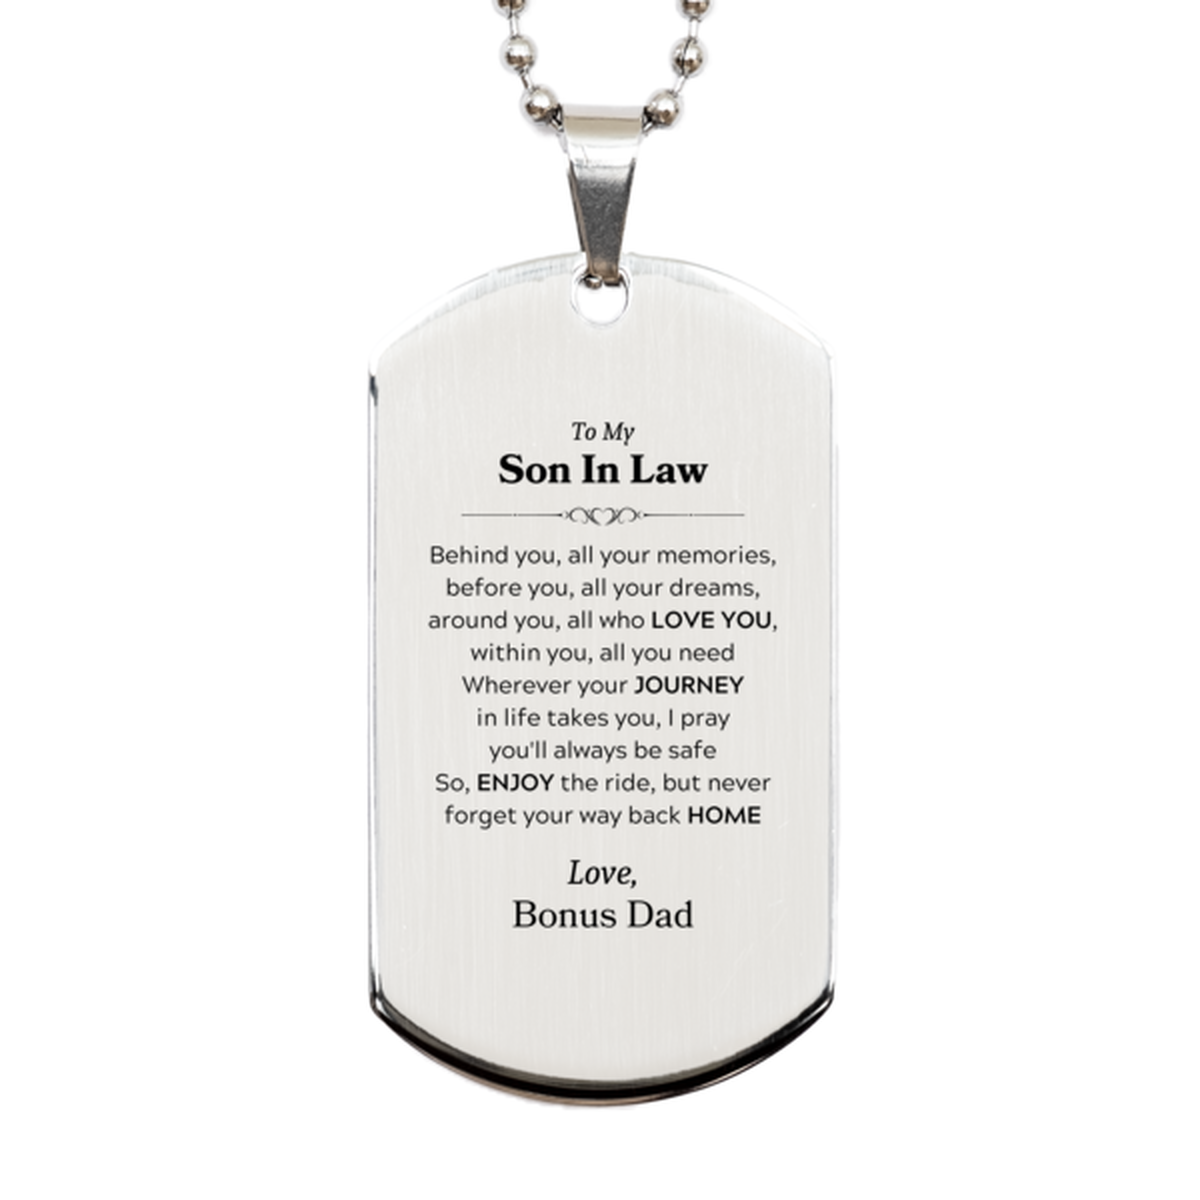 To My Son In Law Graduation Gifts from Bonus Dad, Son In Law Silver Dog Tag Christmas Birthday Gifts for Son In Law Behind you, all your memories, before you, all your dreams. Love, Bonus Dad